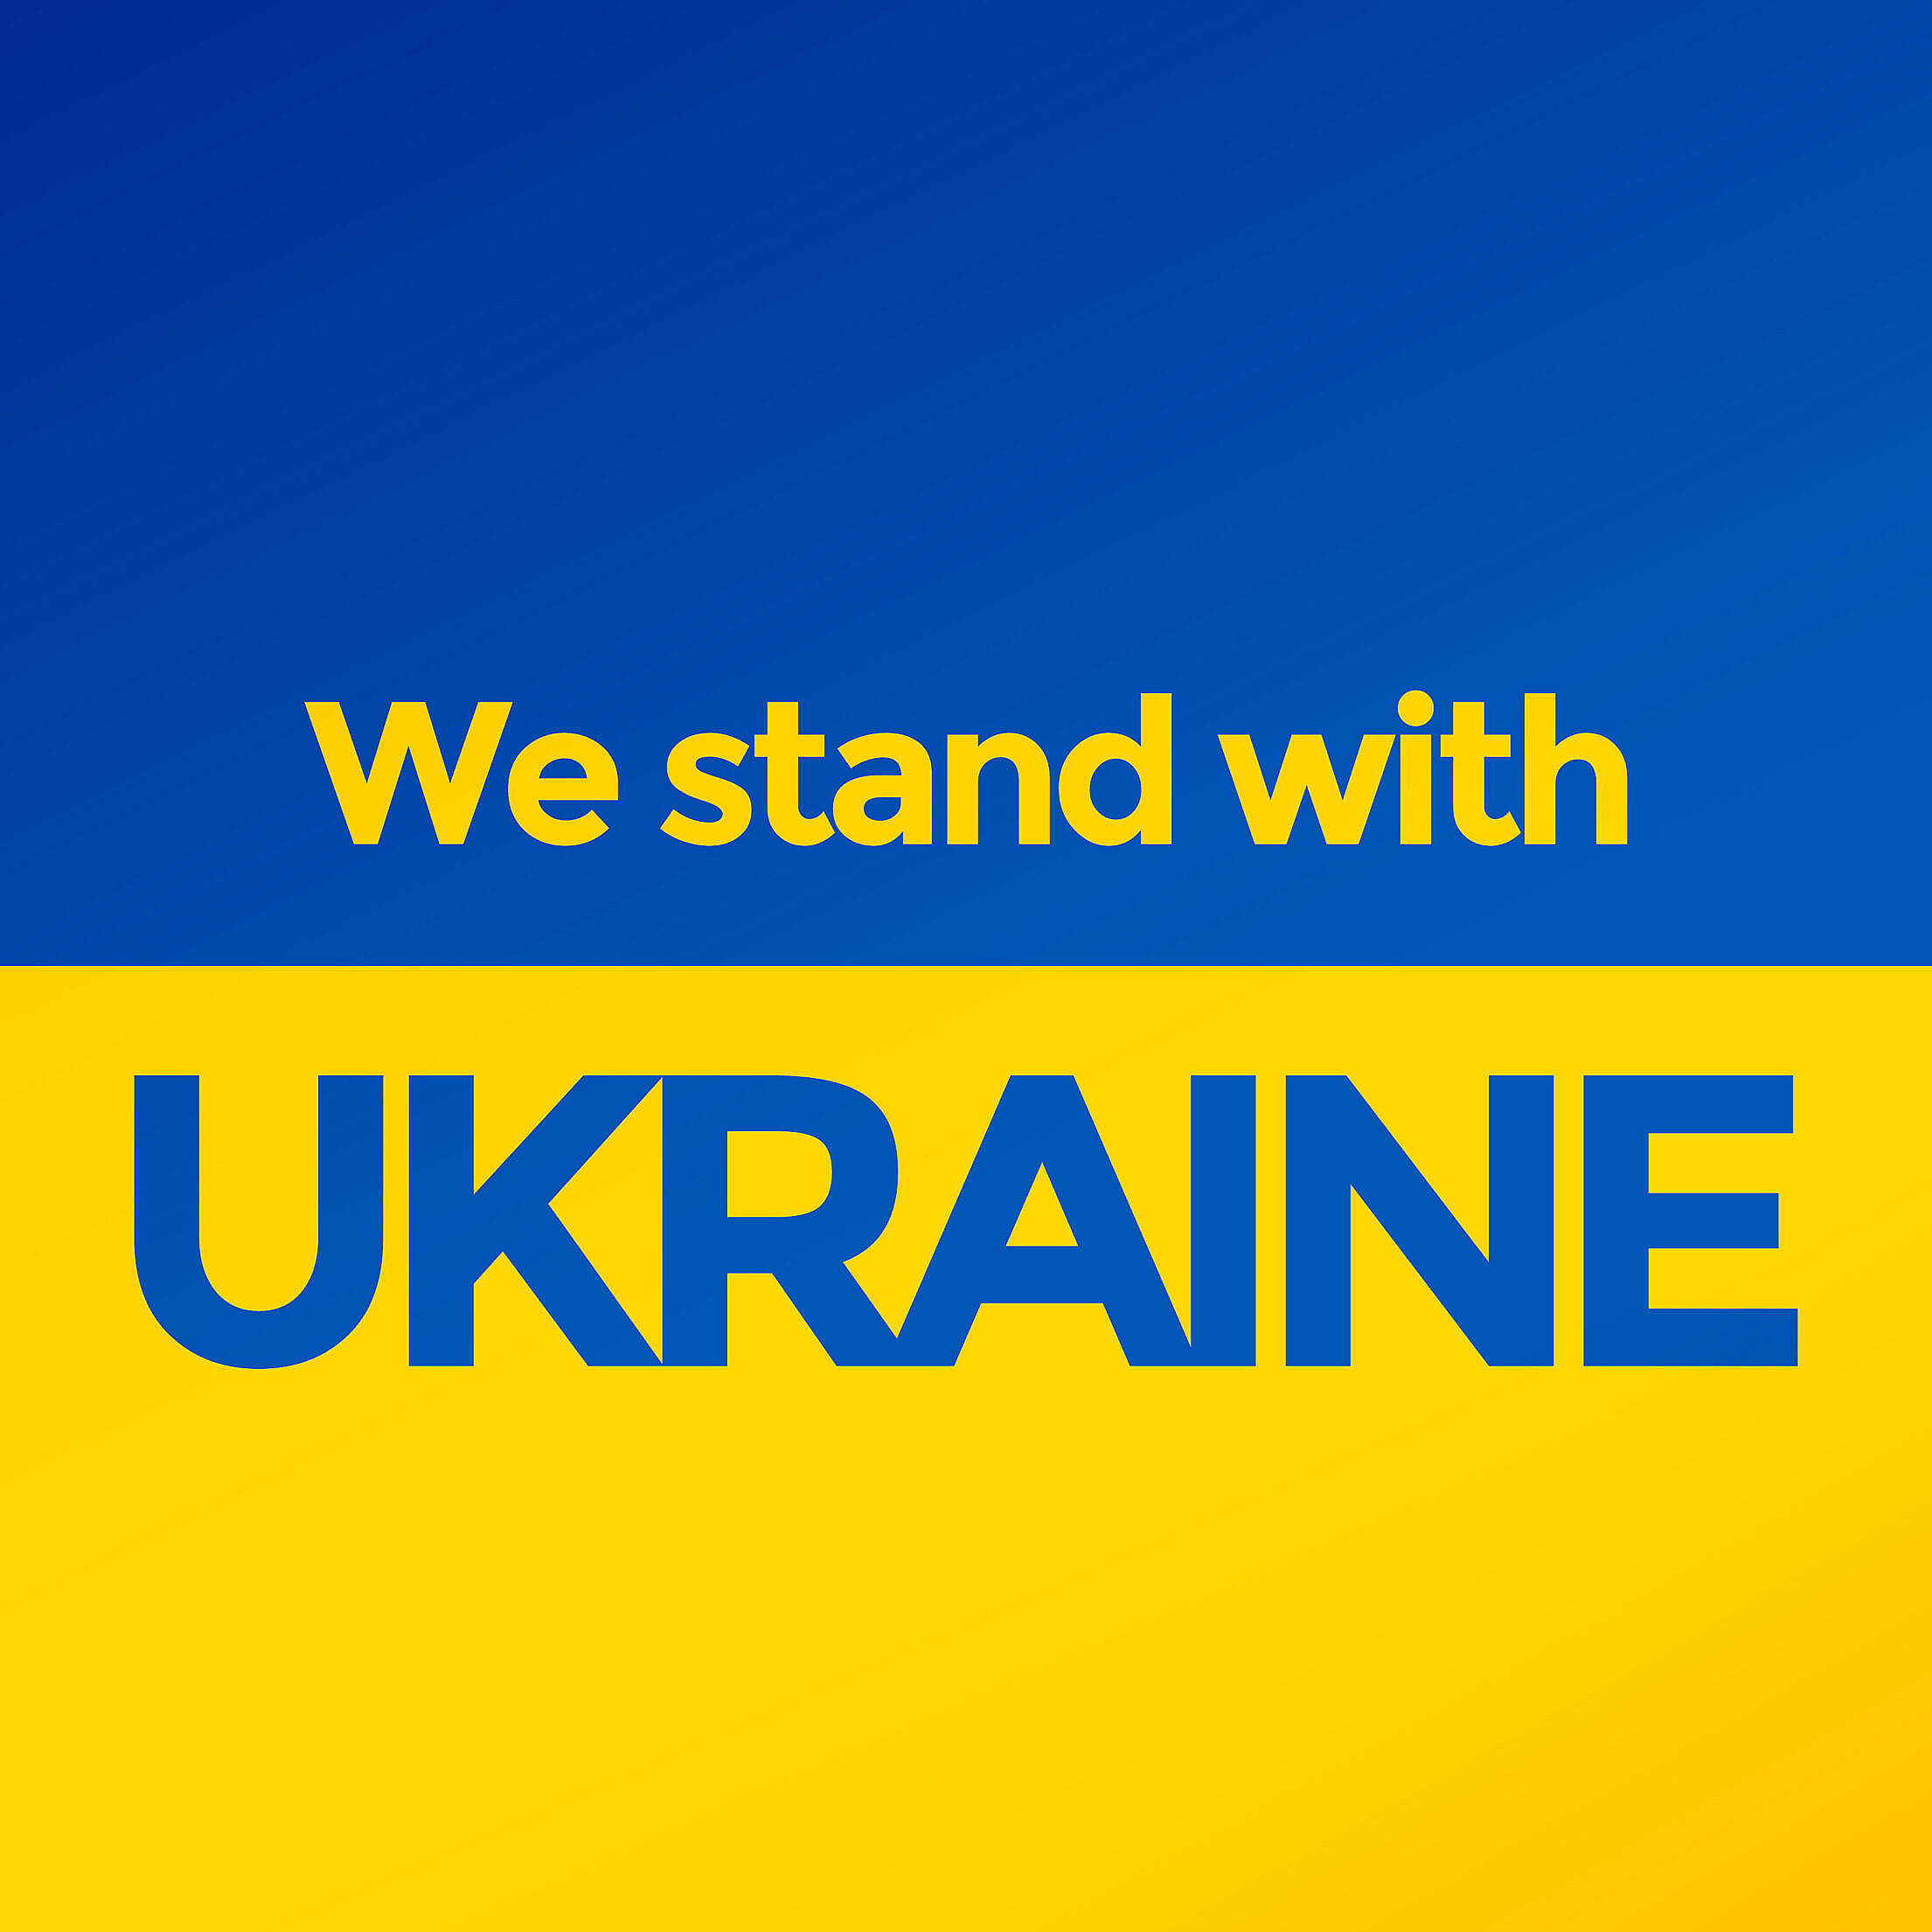 we-stand-with-ukraine-profile-picture-for-social-media-free-photo-2210x2210.jpeg